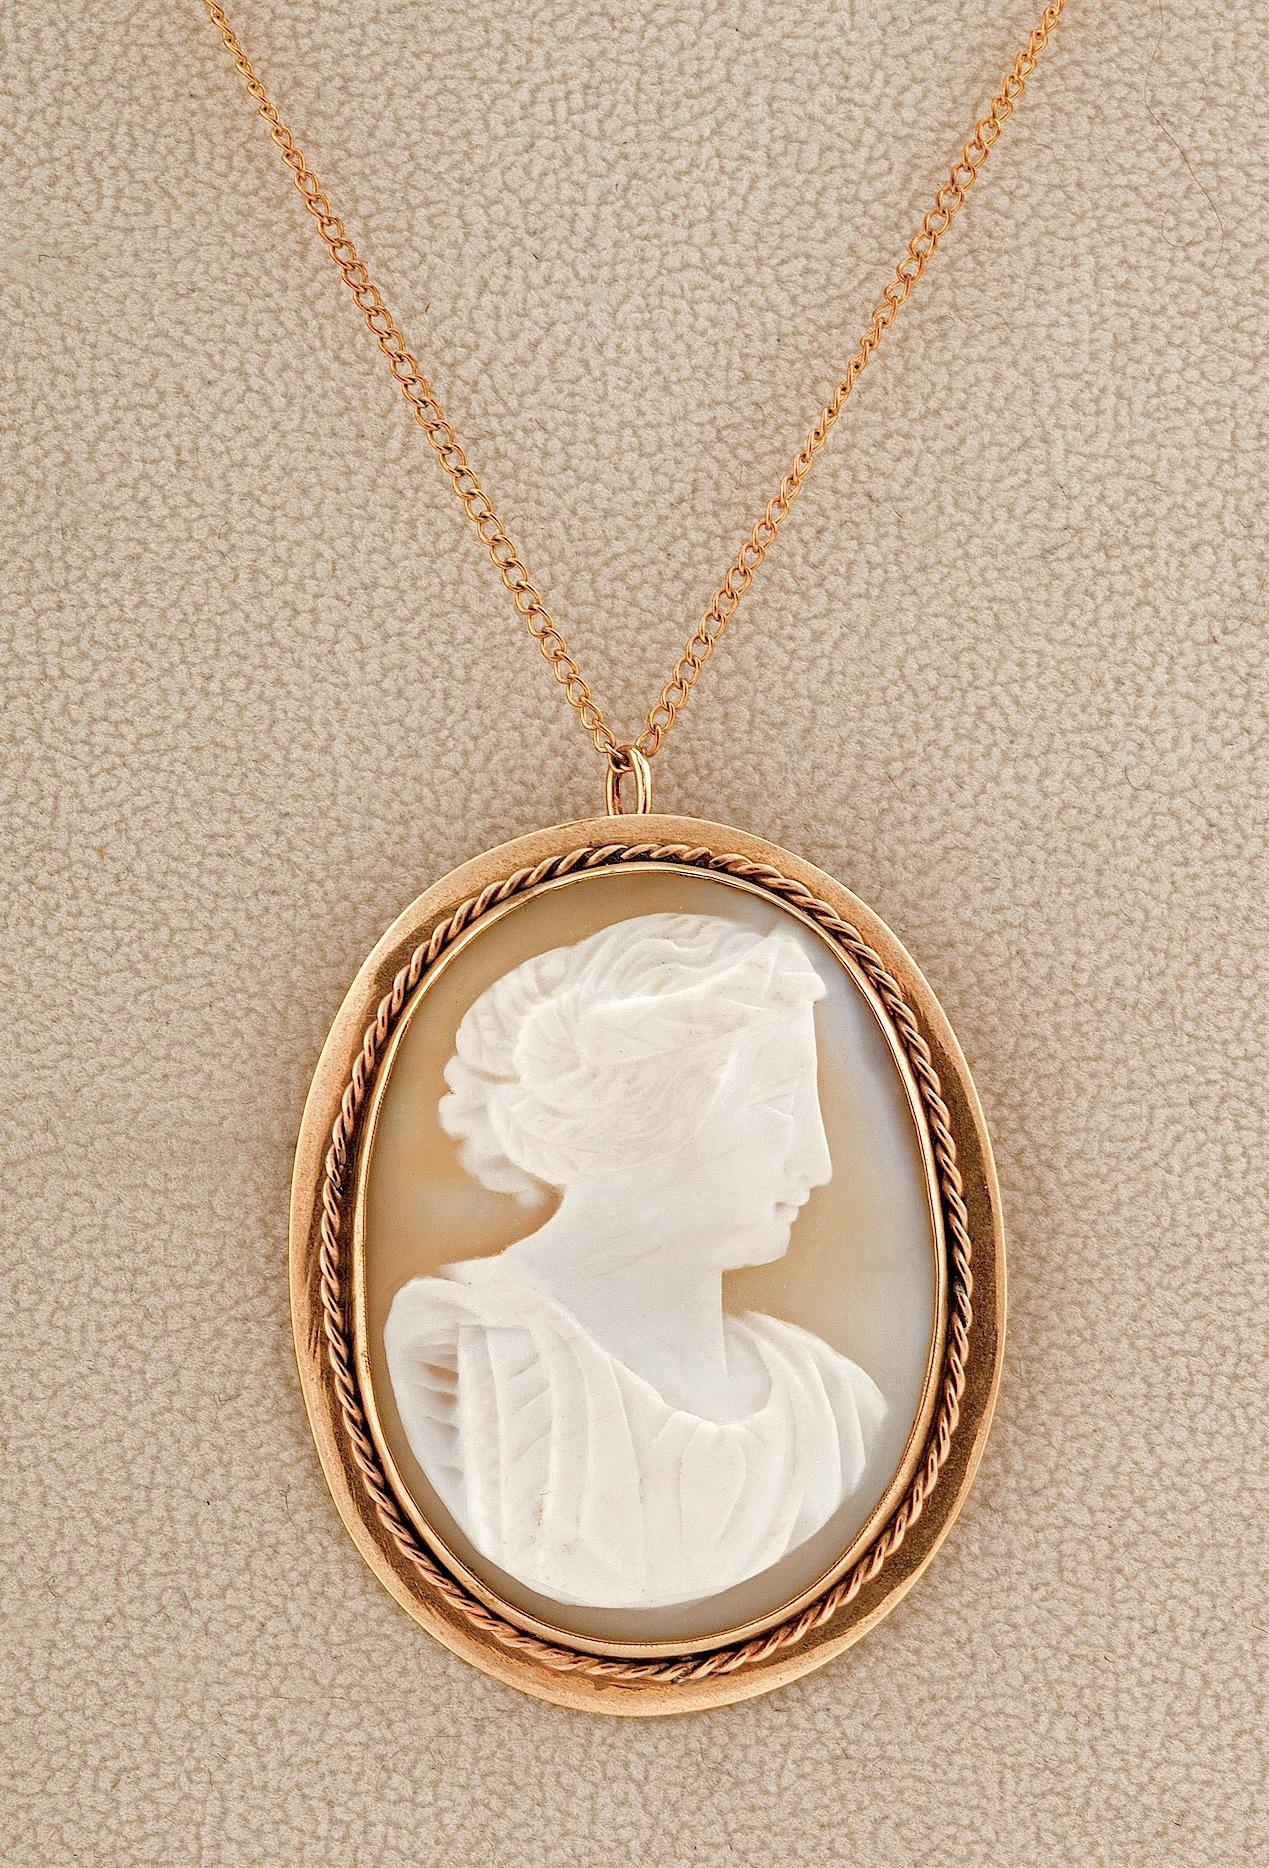 Stunning 19th Century Antique Shell Cameo in Yellow Gold that can be worn both as a pendant or brooch.  The beautiful gold frame highlights this intricately carved goddess.  The brooch was tested as 14K.  I purchased this with no chain but adding a